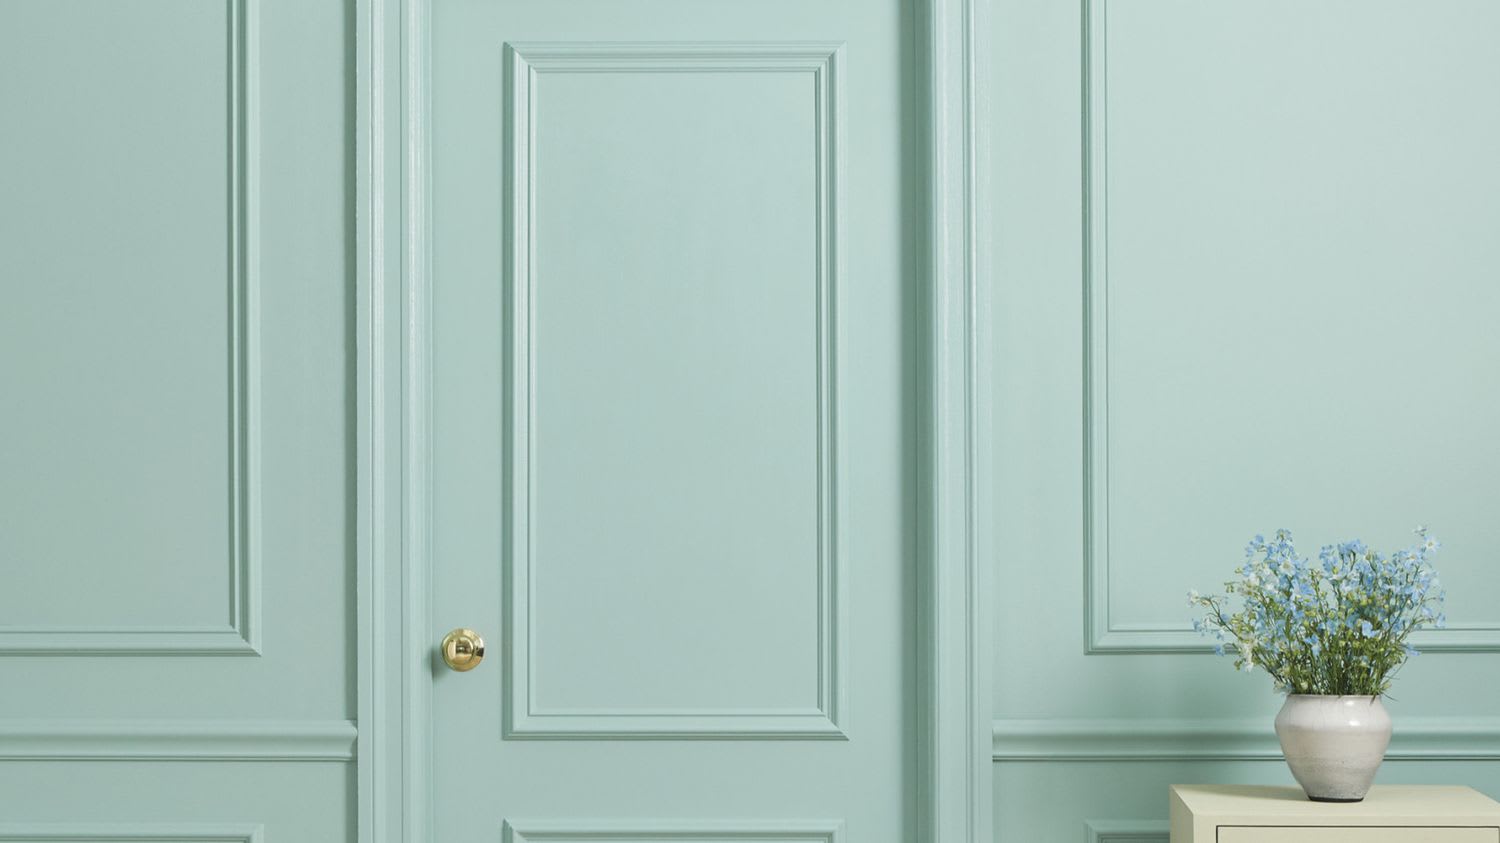 How to Pick the Perfect Trim Paint Color, According to a Paint Pro